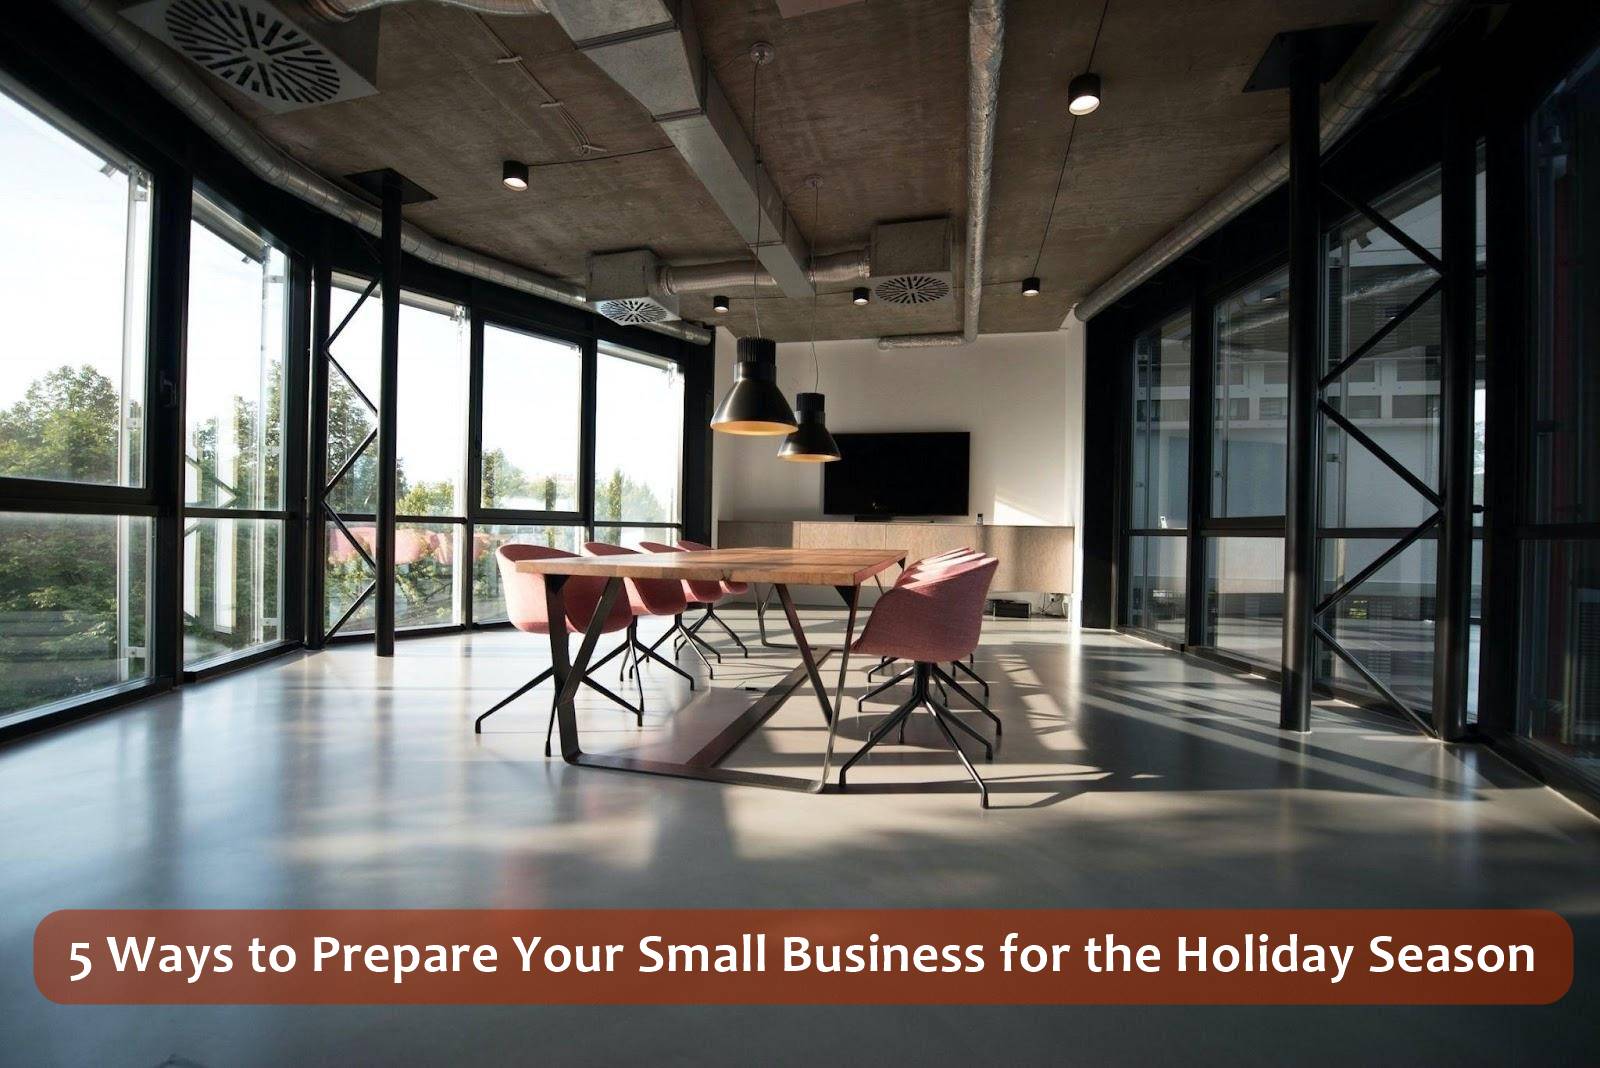 5 Ways to Prepare Your Small Business for the Holiday Season